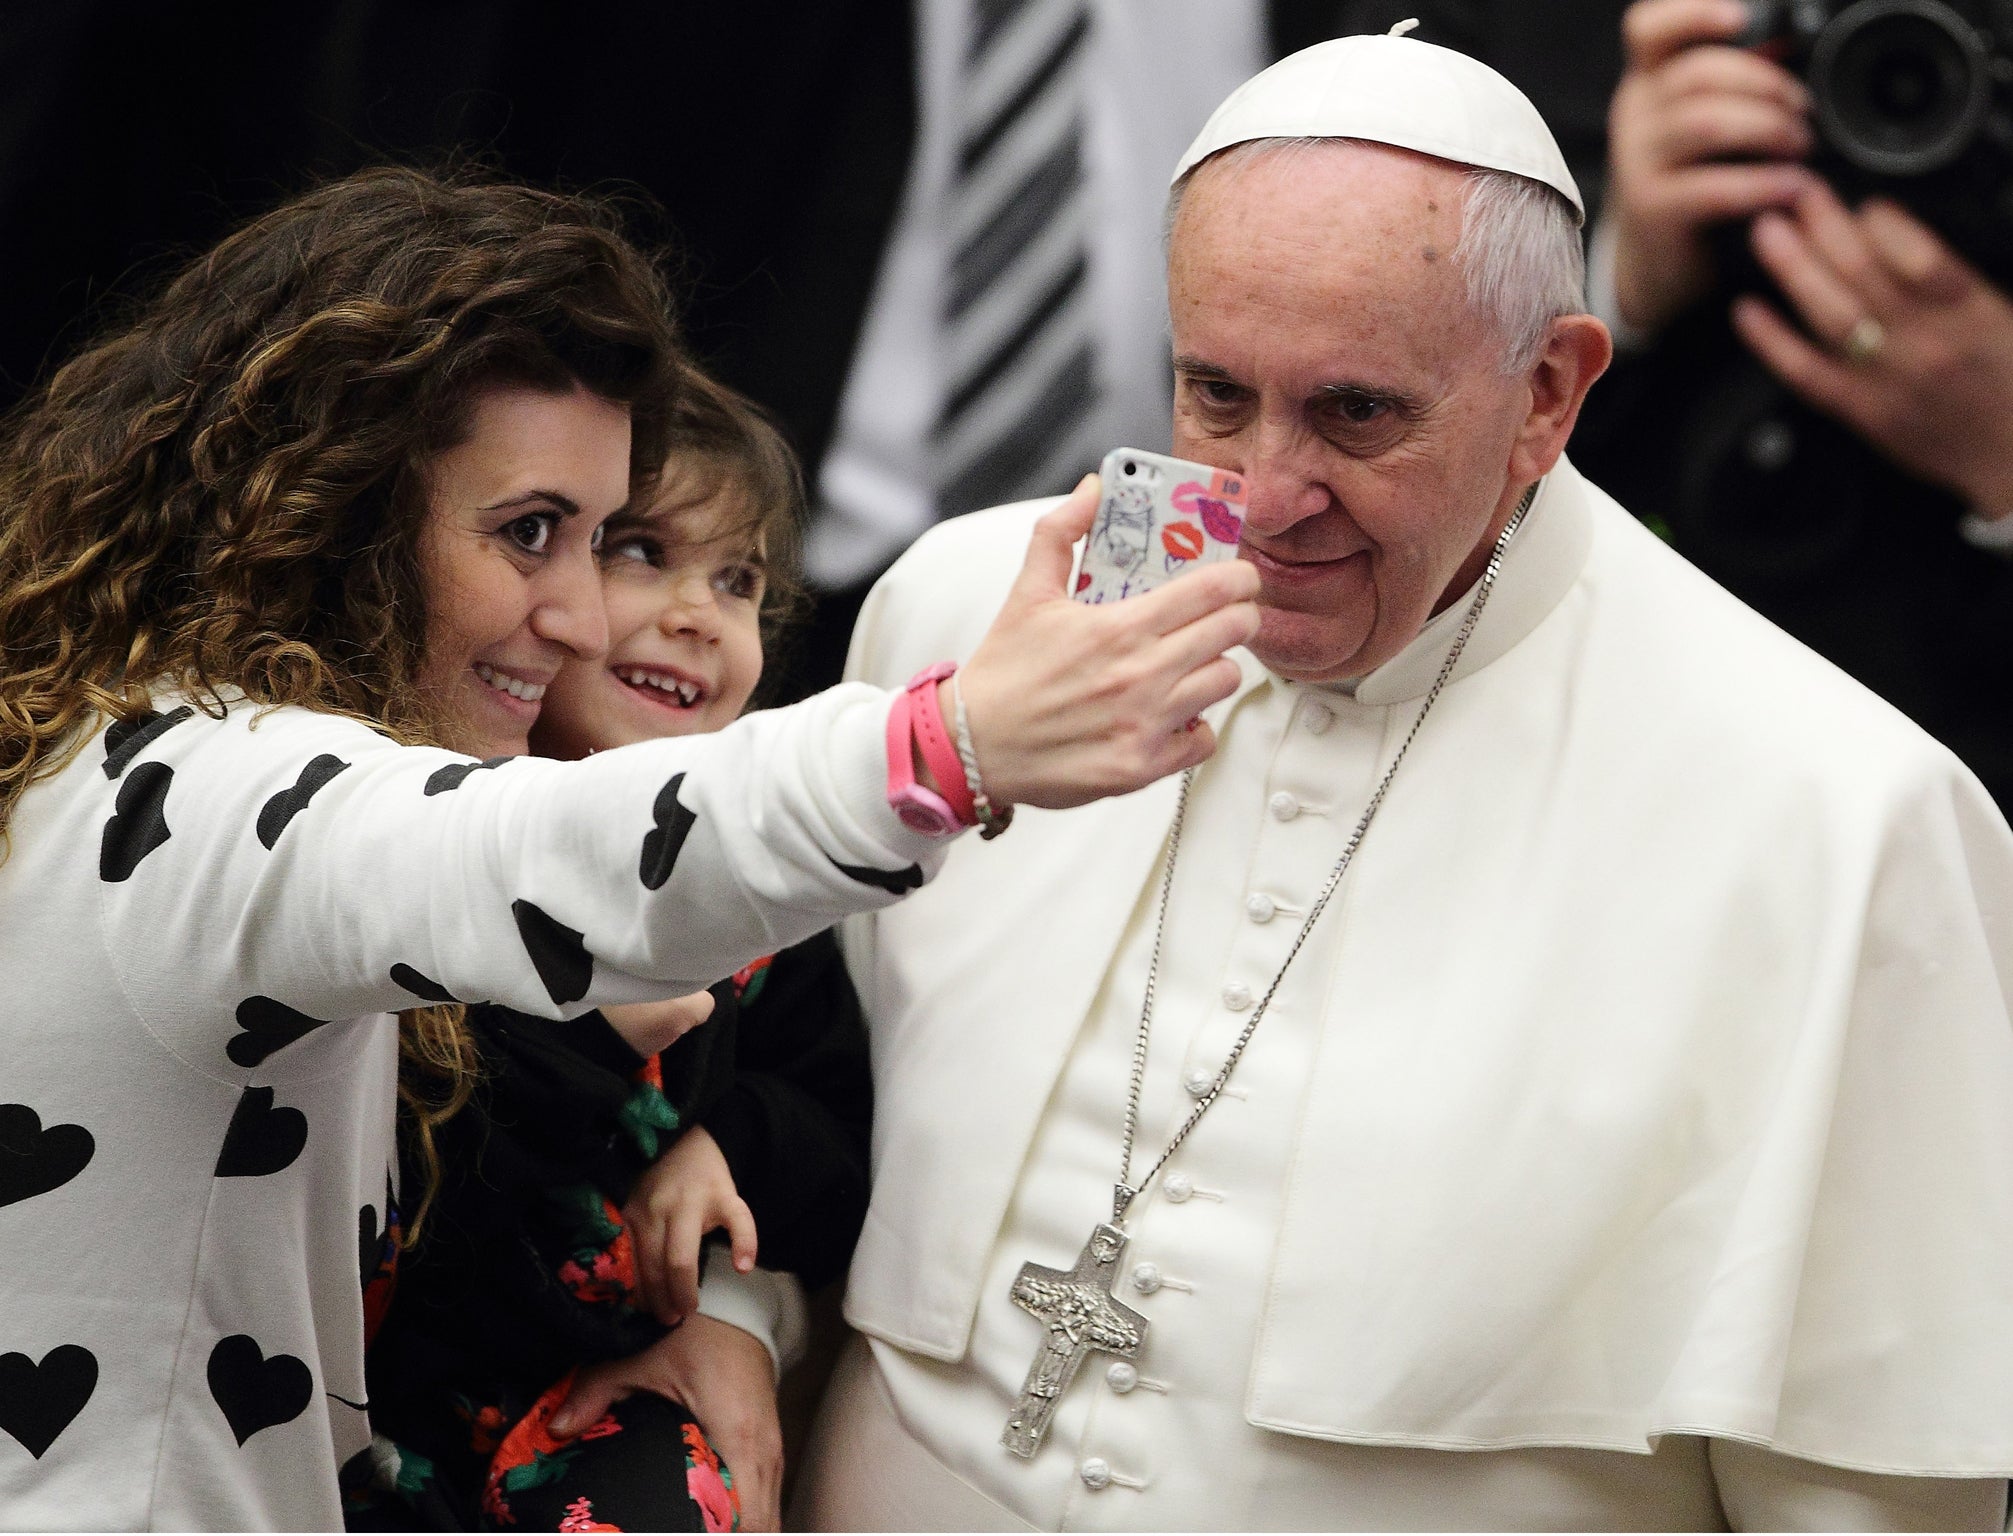 Pope Francis and head of the Catholic Church posing for a selfie with a teenage girl